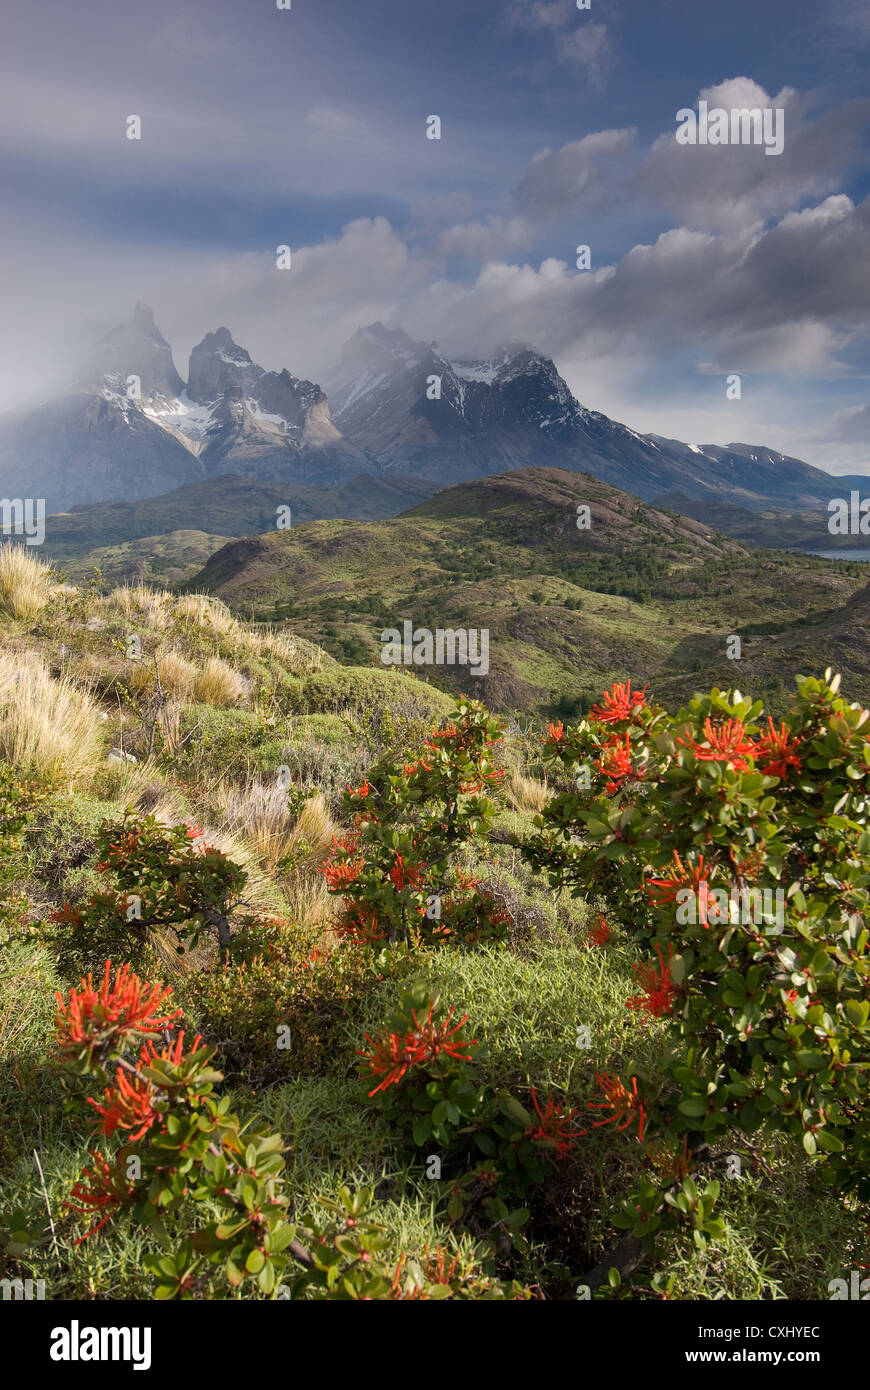 Elk198-4392v Chile, Patagonia, Torres del Paine NP, Cuernos massif from above Lago Pehoe, Andes Stock Photo